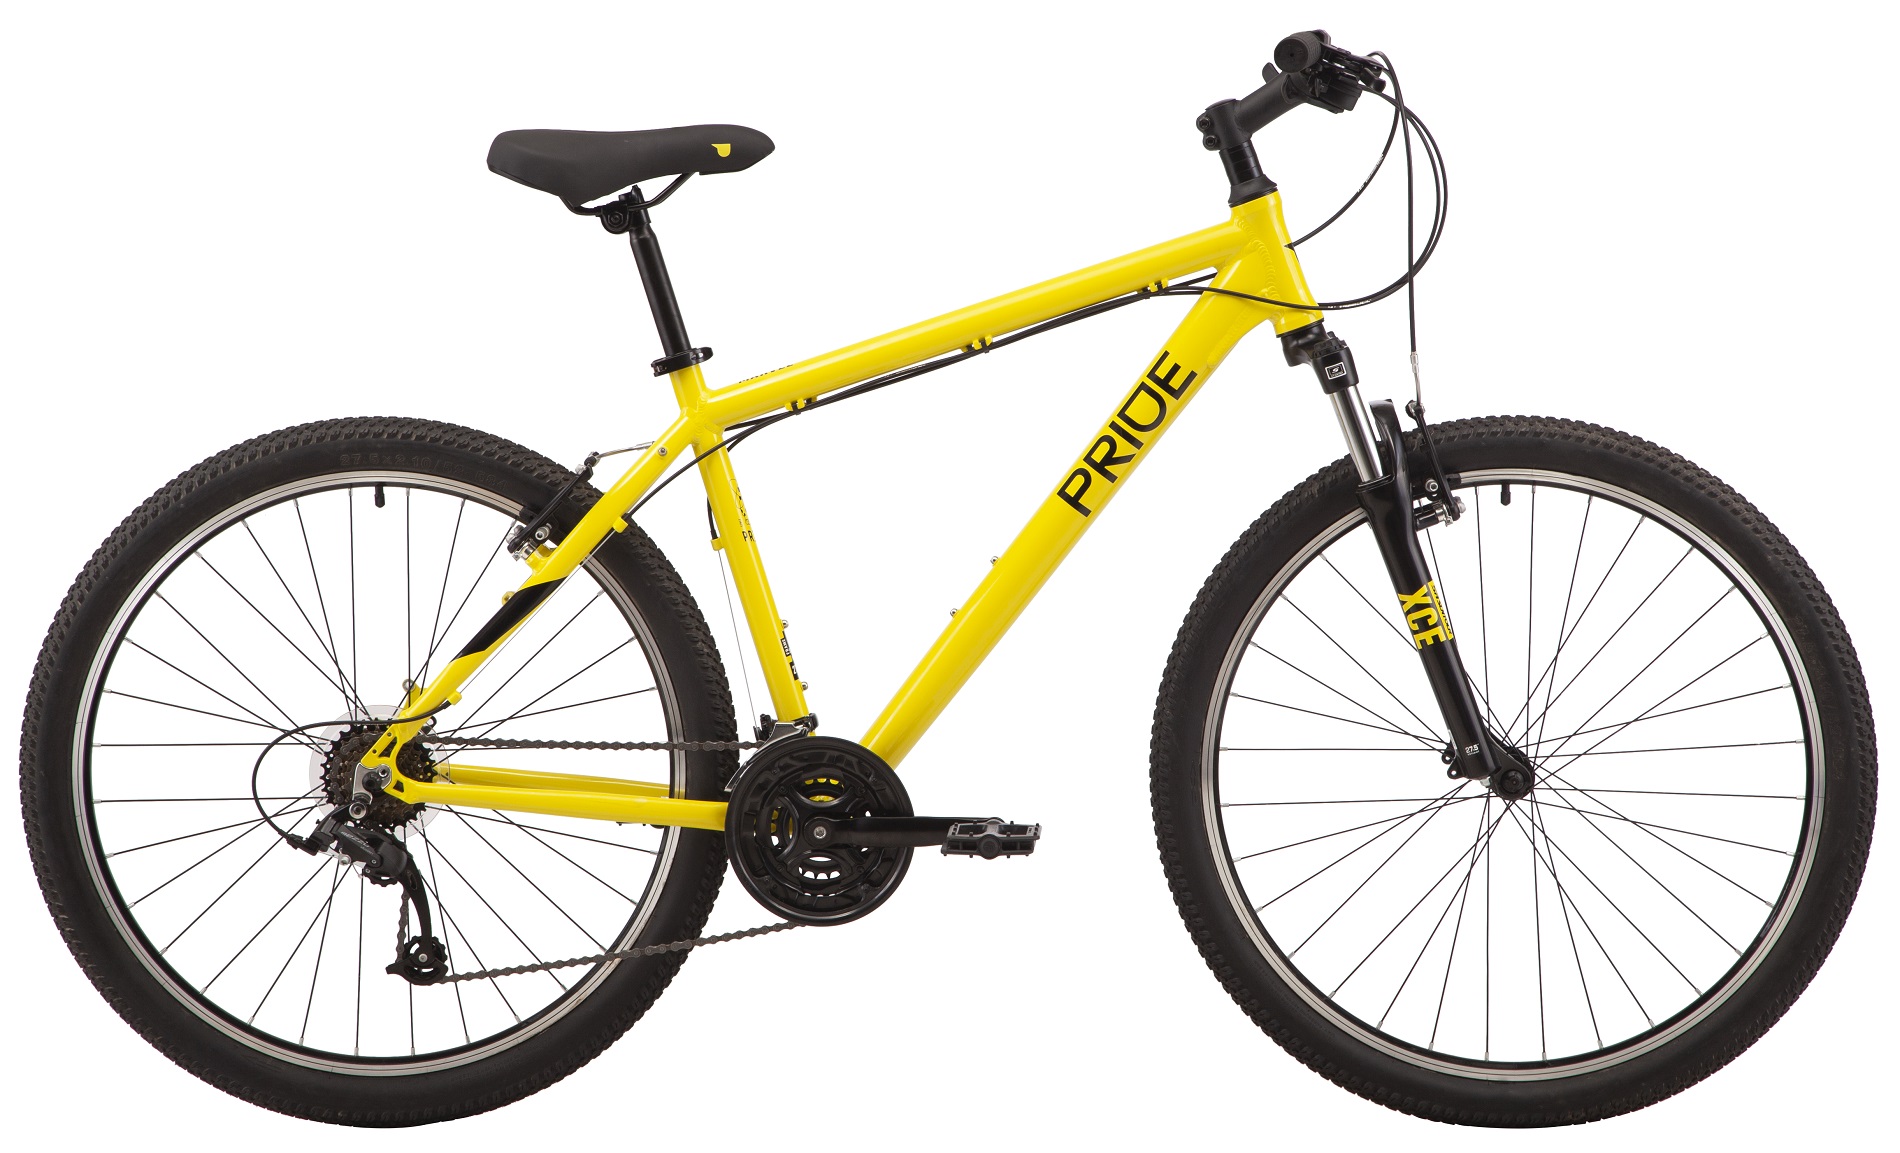 27.5" PRIDE MARVEL 7.1 frame - L 2022 yellow (rear and front switches and tamnet - Microshift) Photo